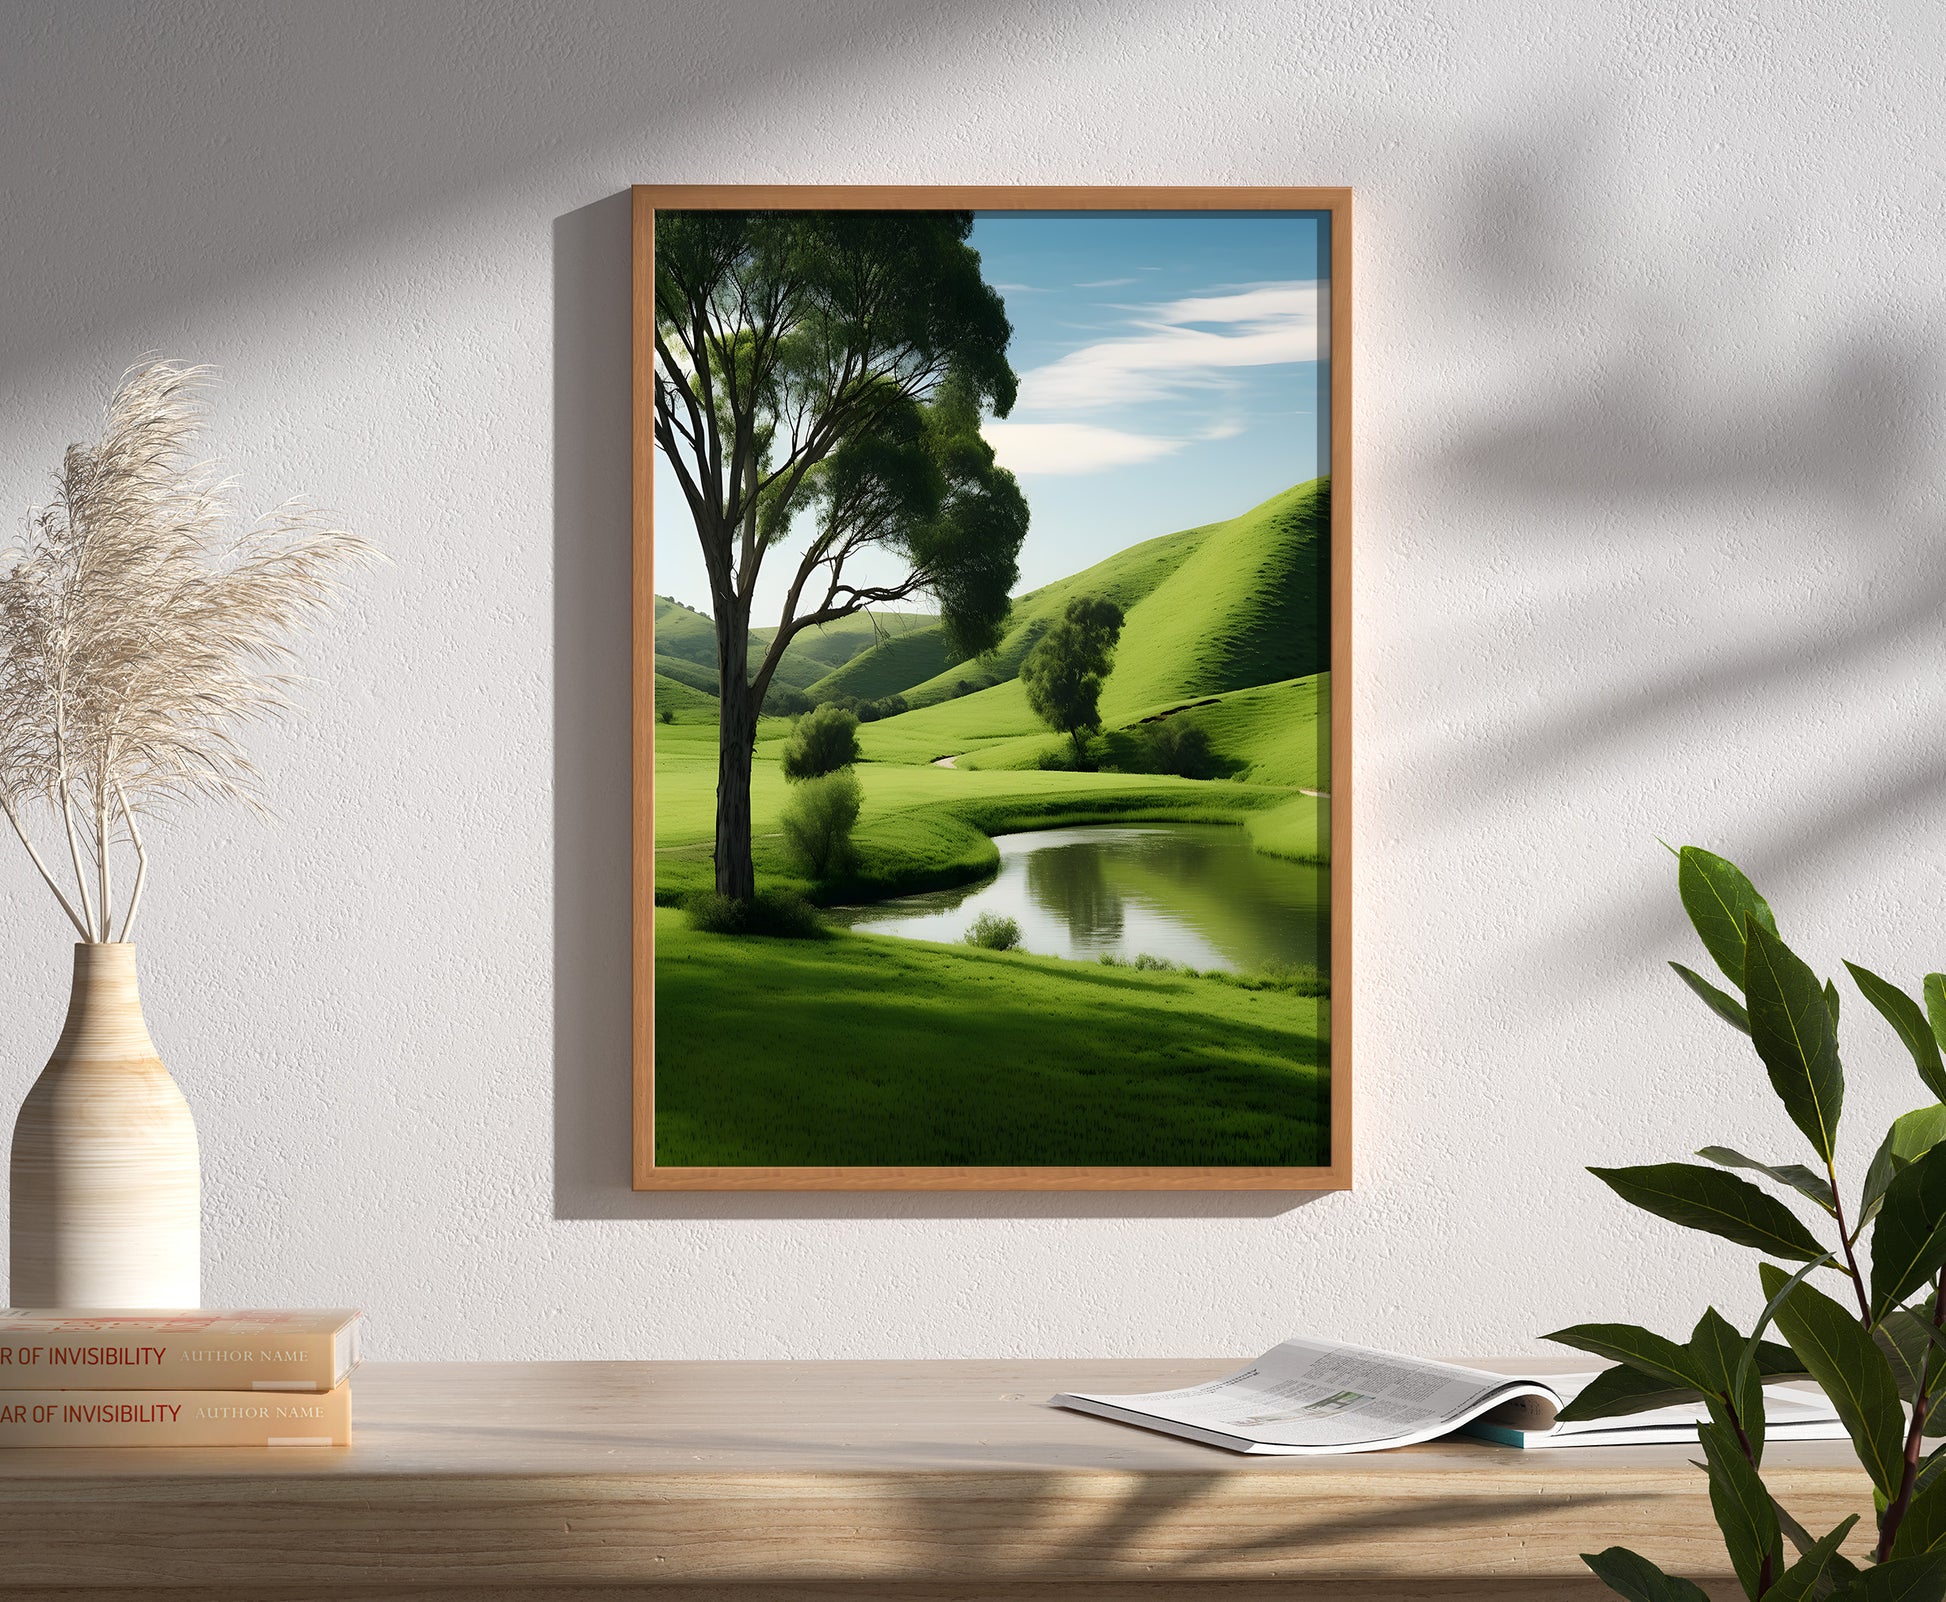 A framed landscape painting of rolling green hills and a serene pond on a wall.